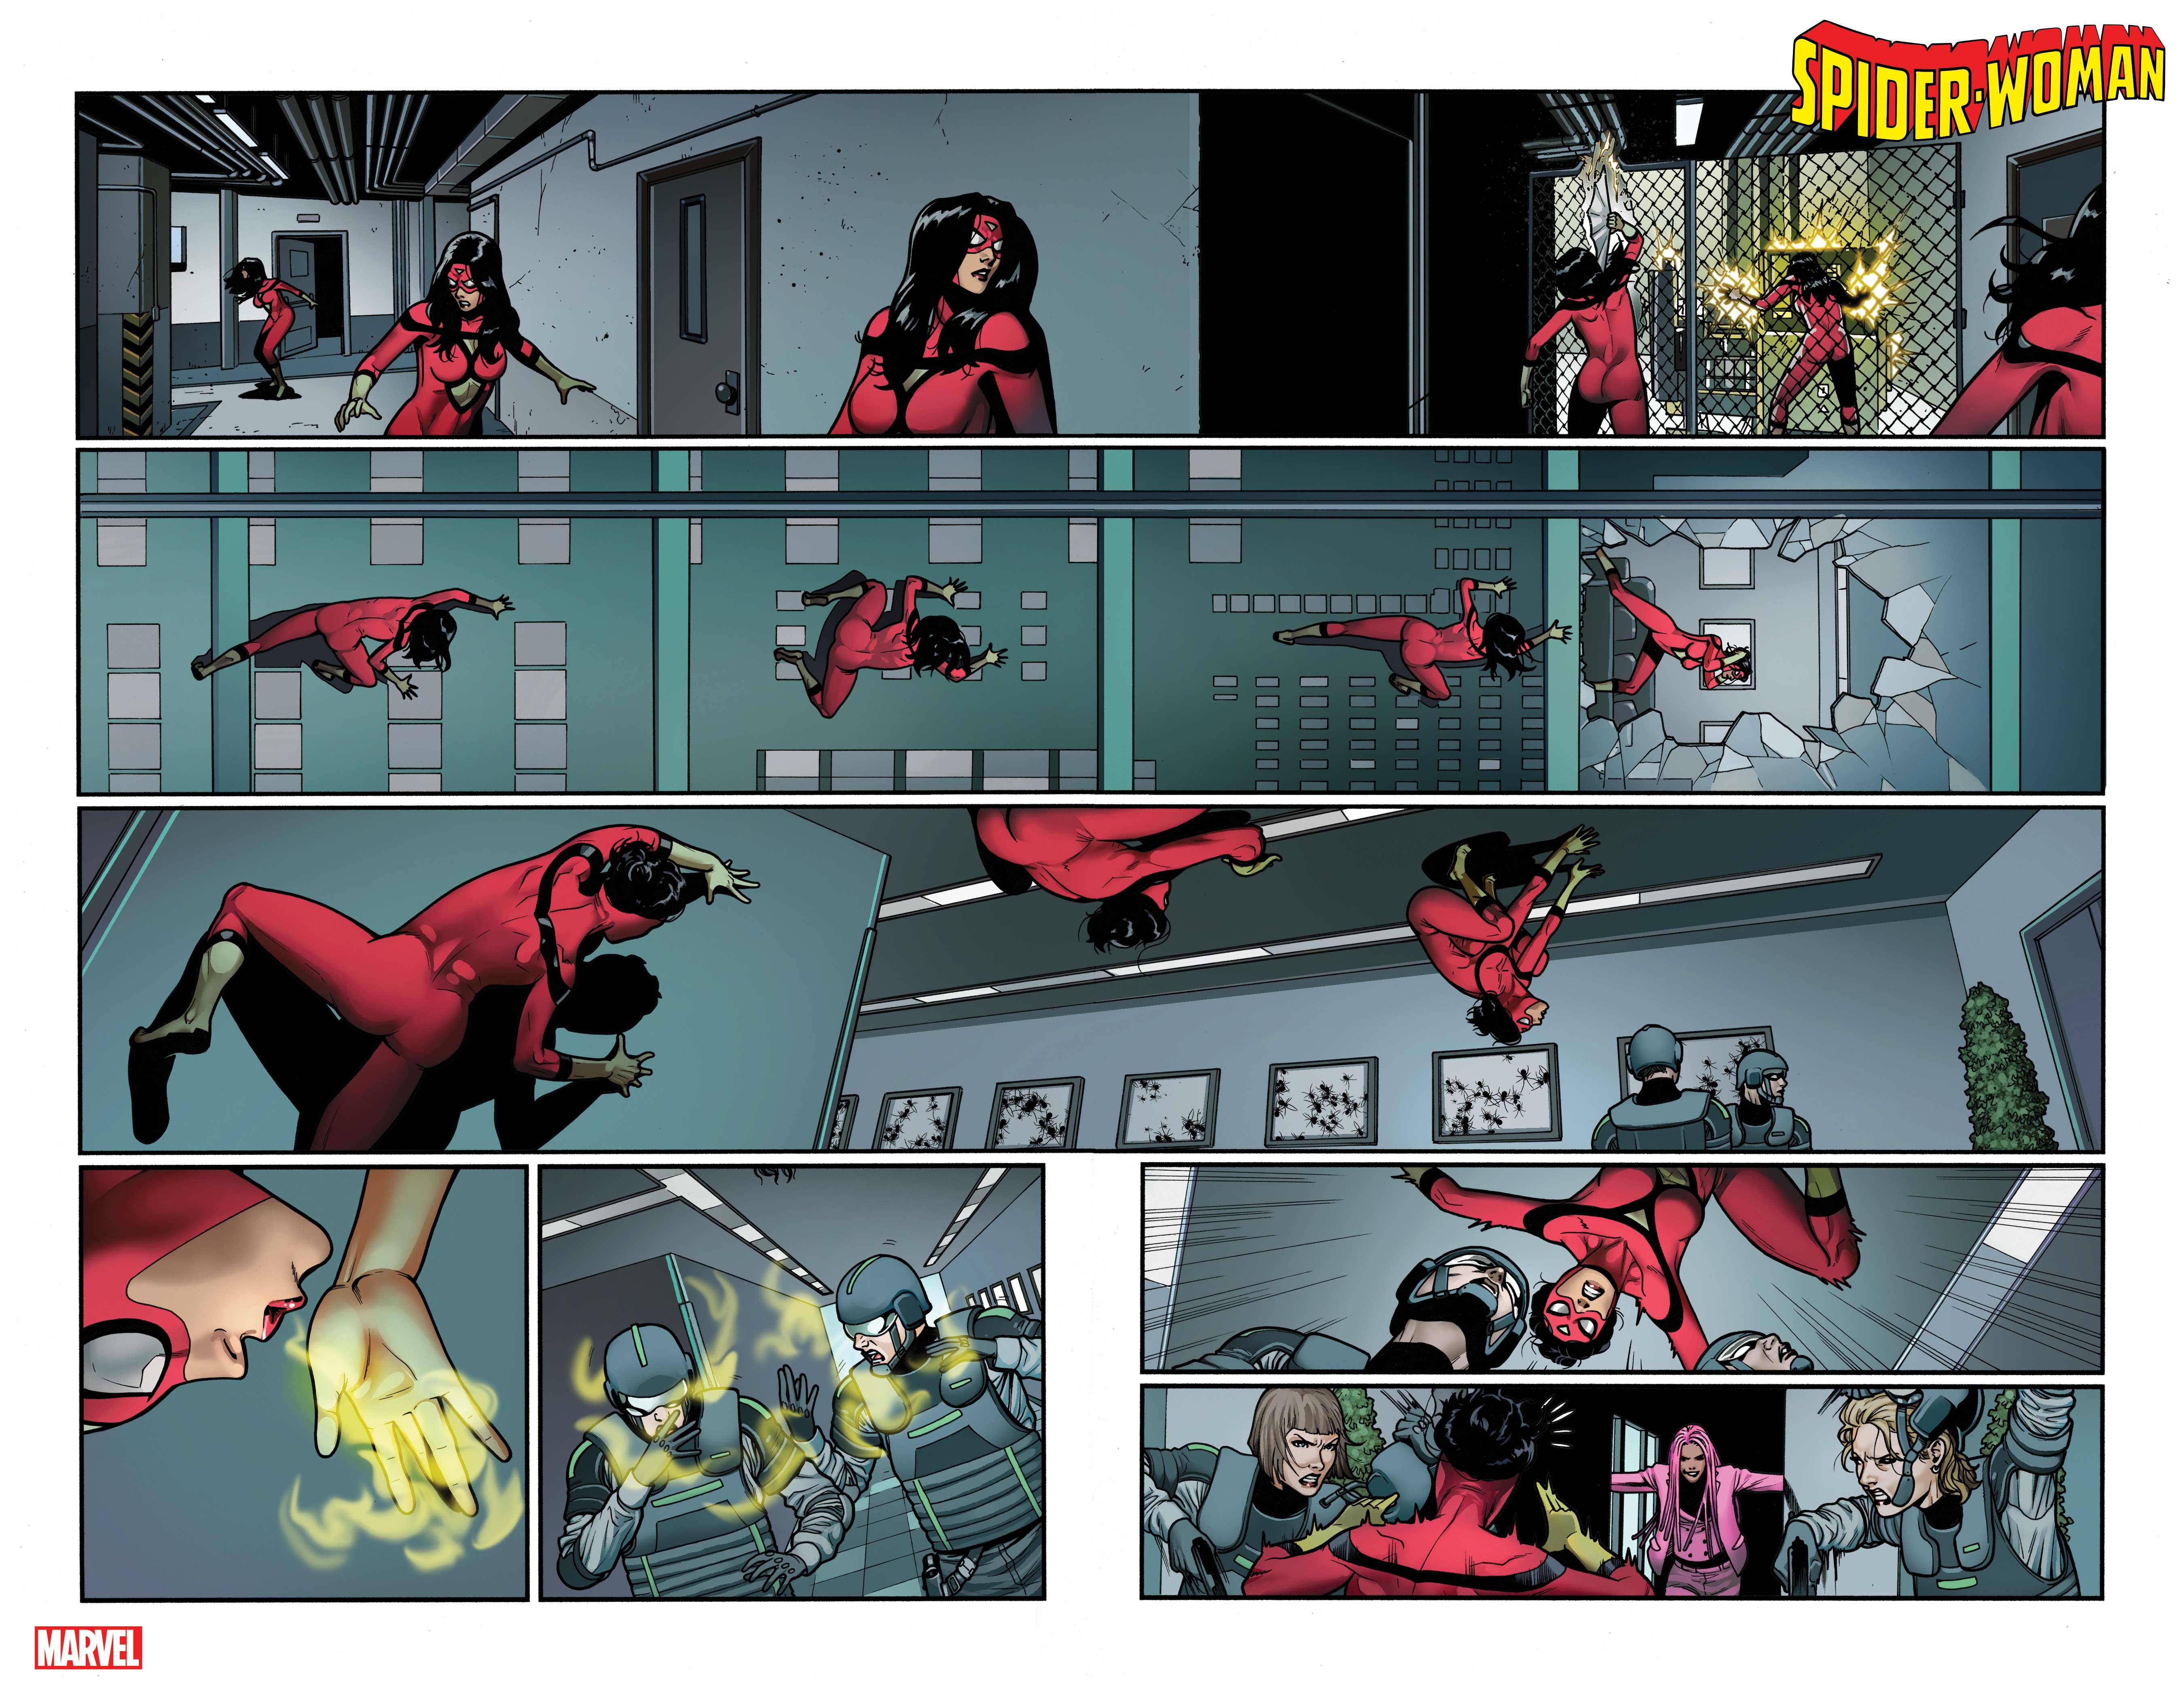 Marvel preview art for Spider-Woman #14